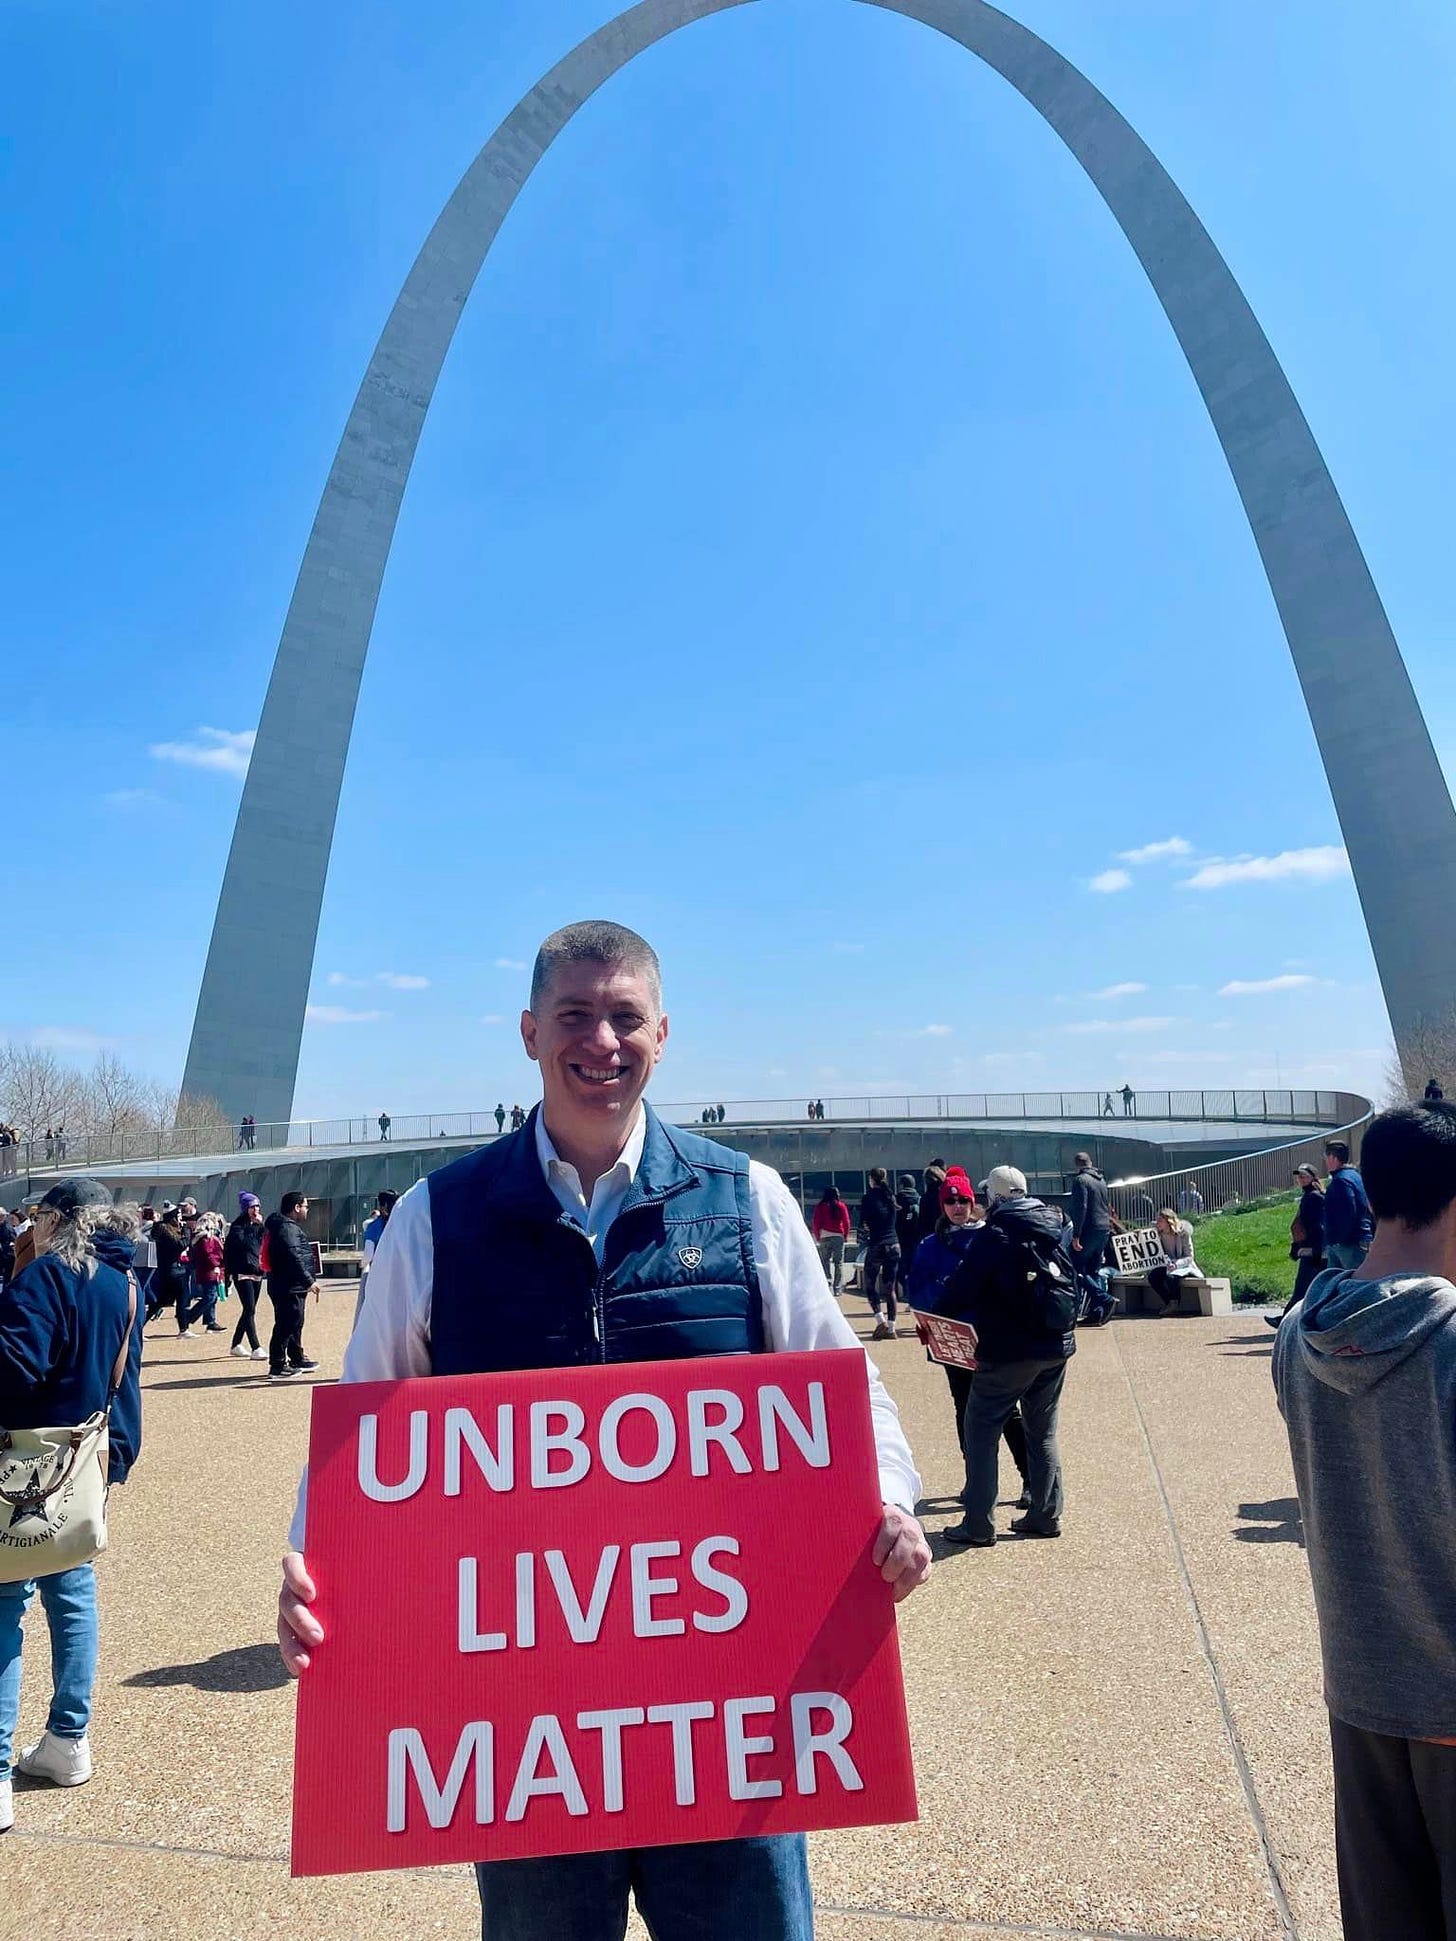 May be an image of 6 people, the Gateway Arch and text that says 'UNBORN LIVES MATTER'